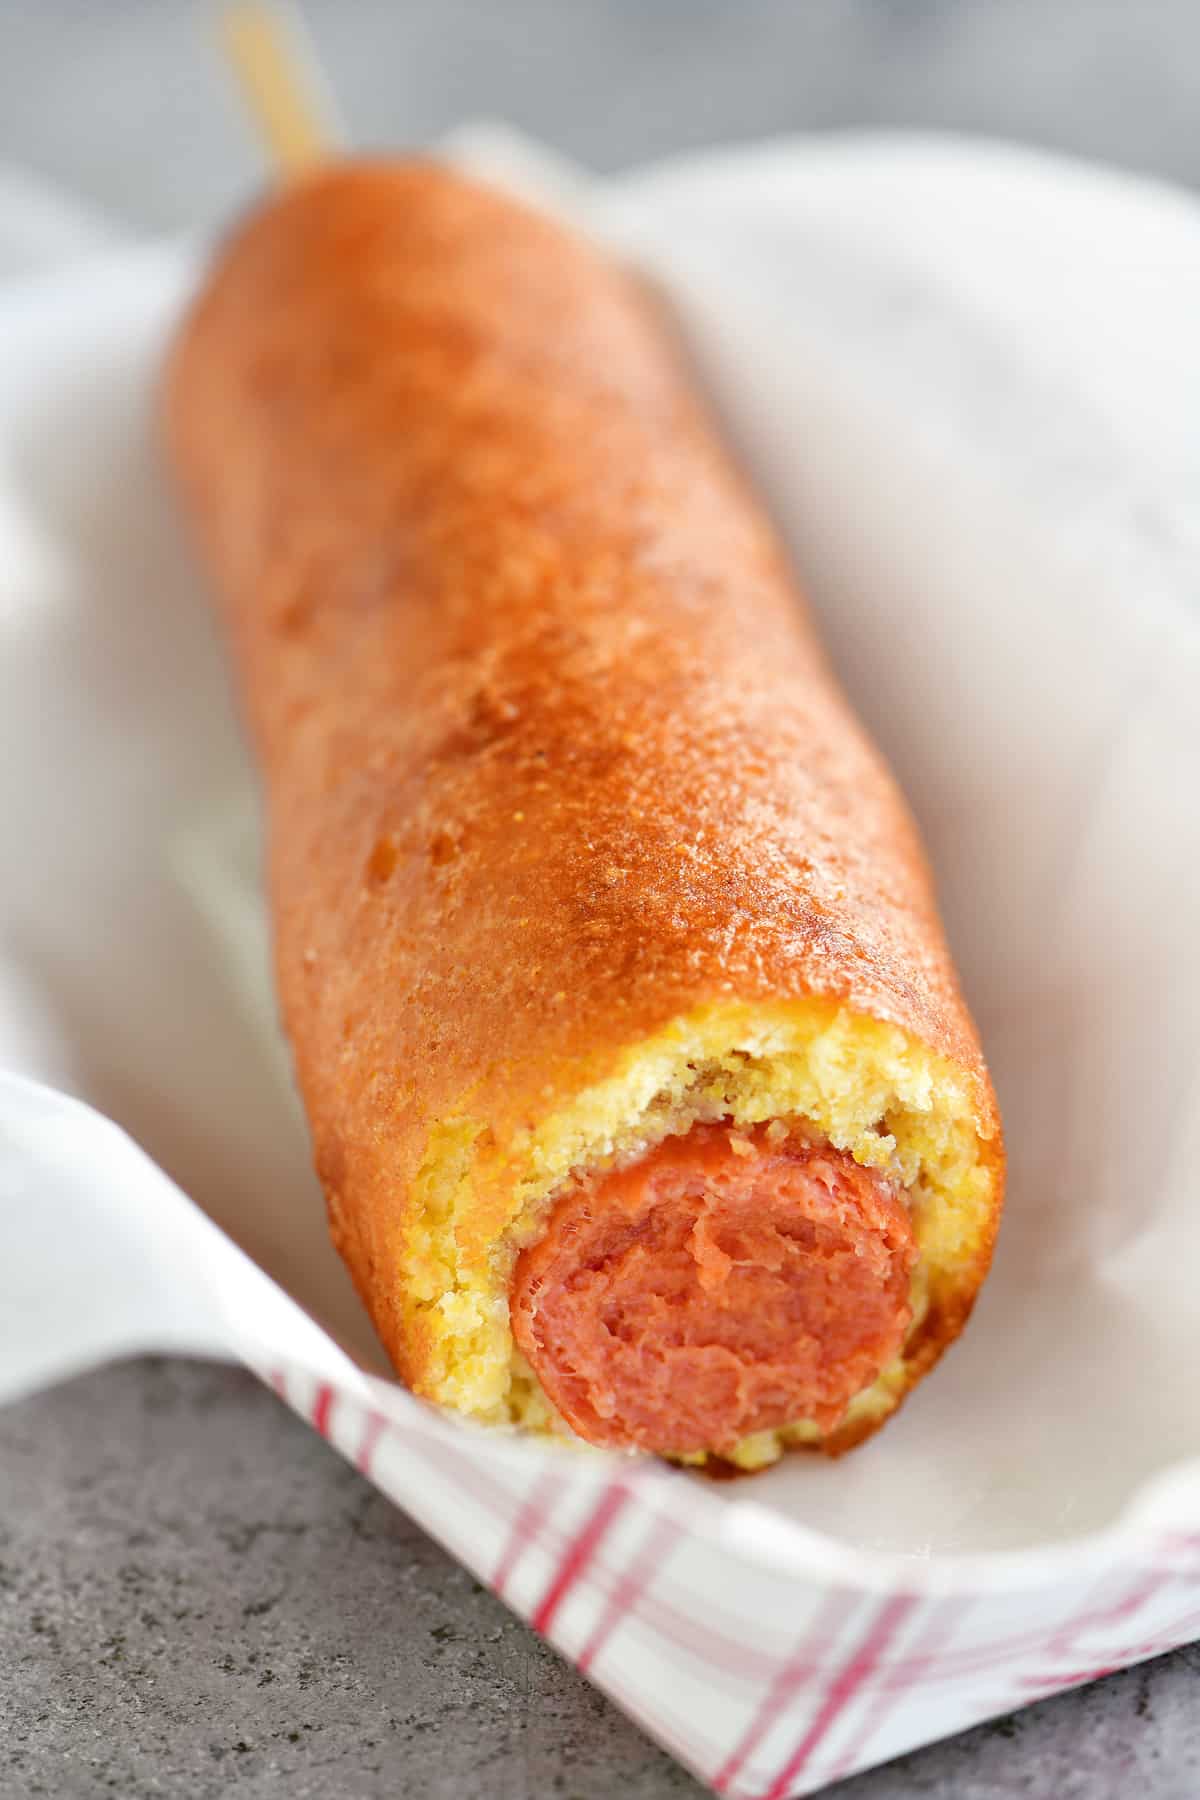 corn dog on a paper food tray with a bite out of it